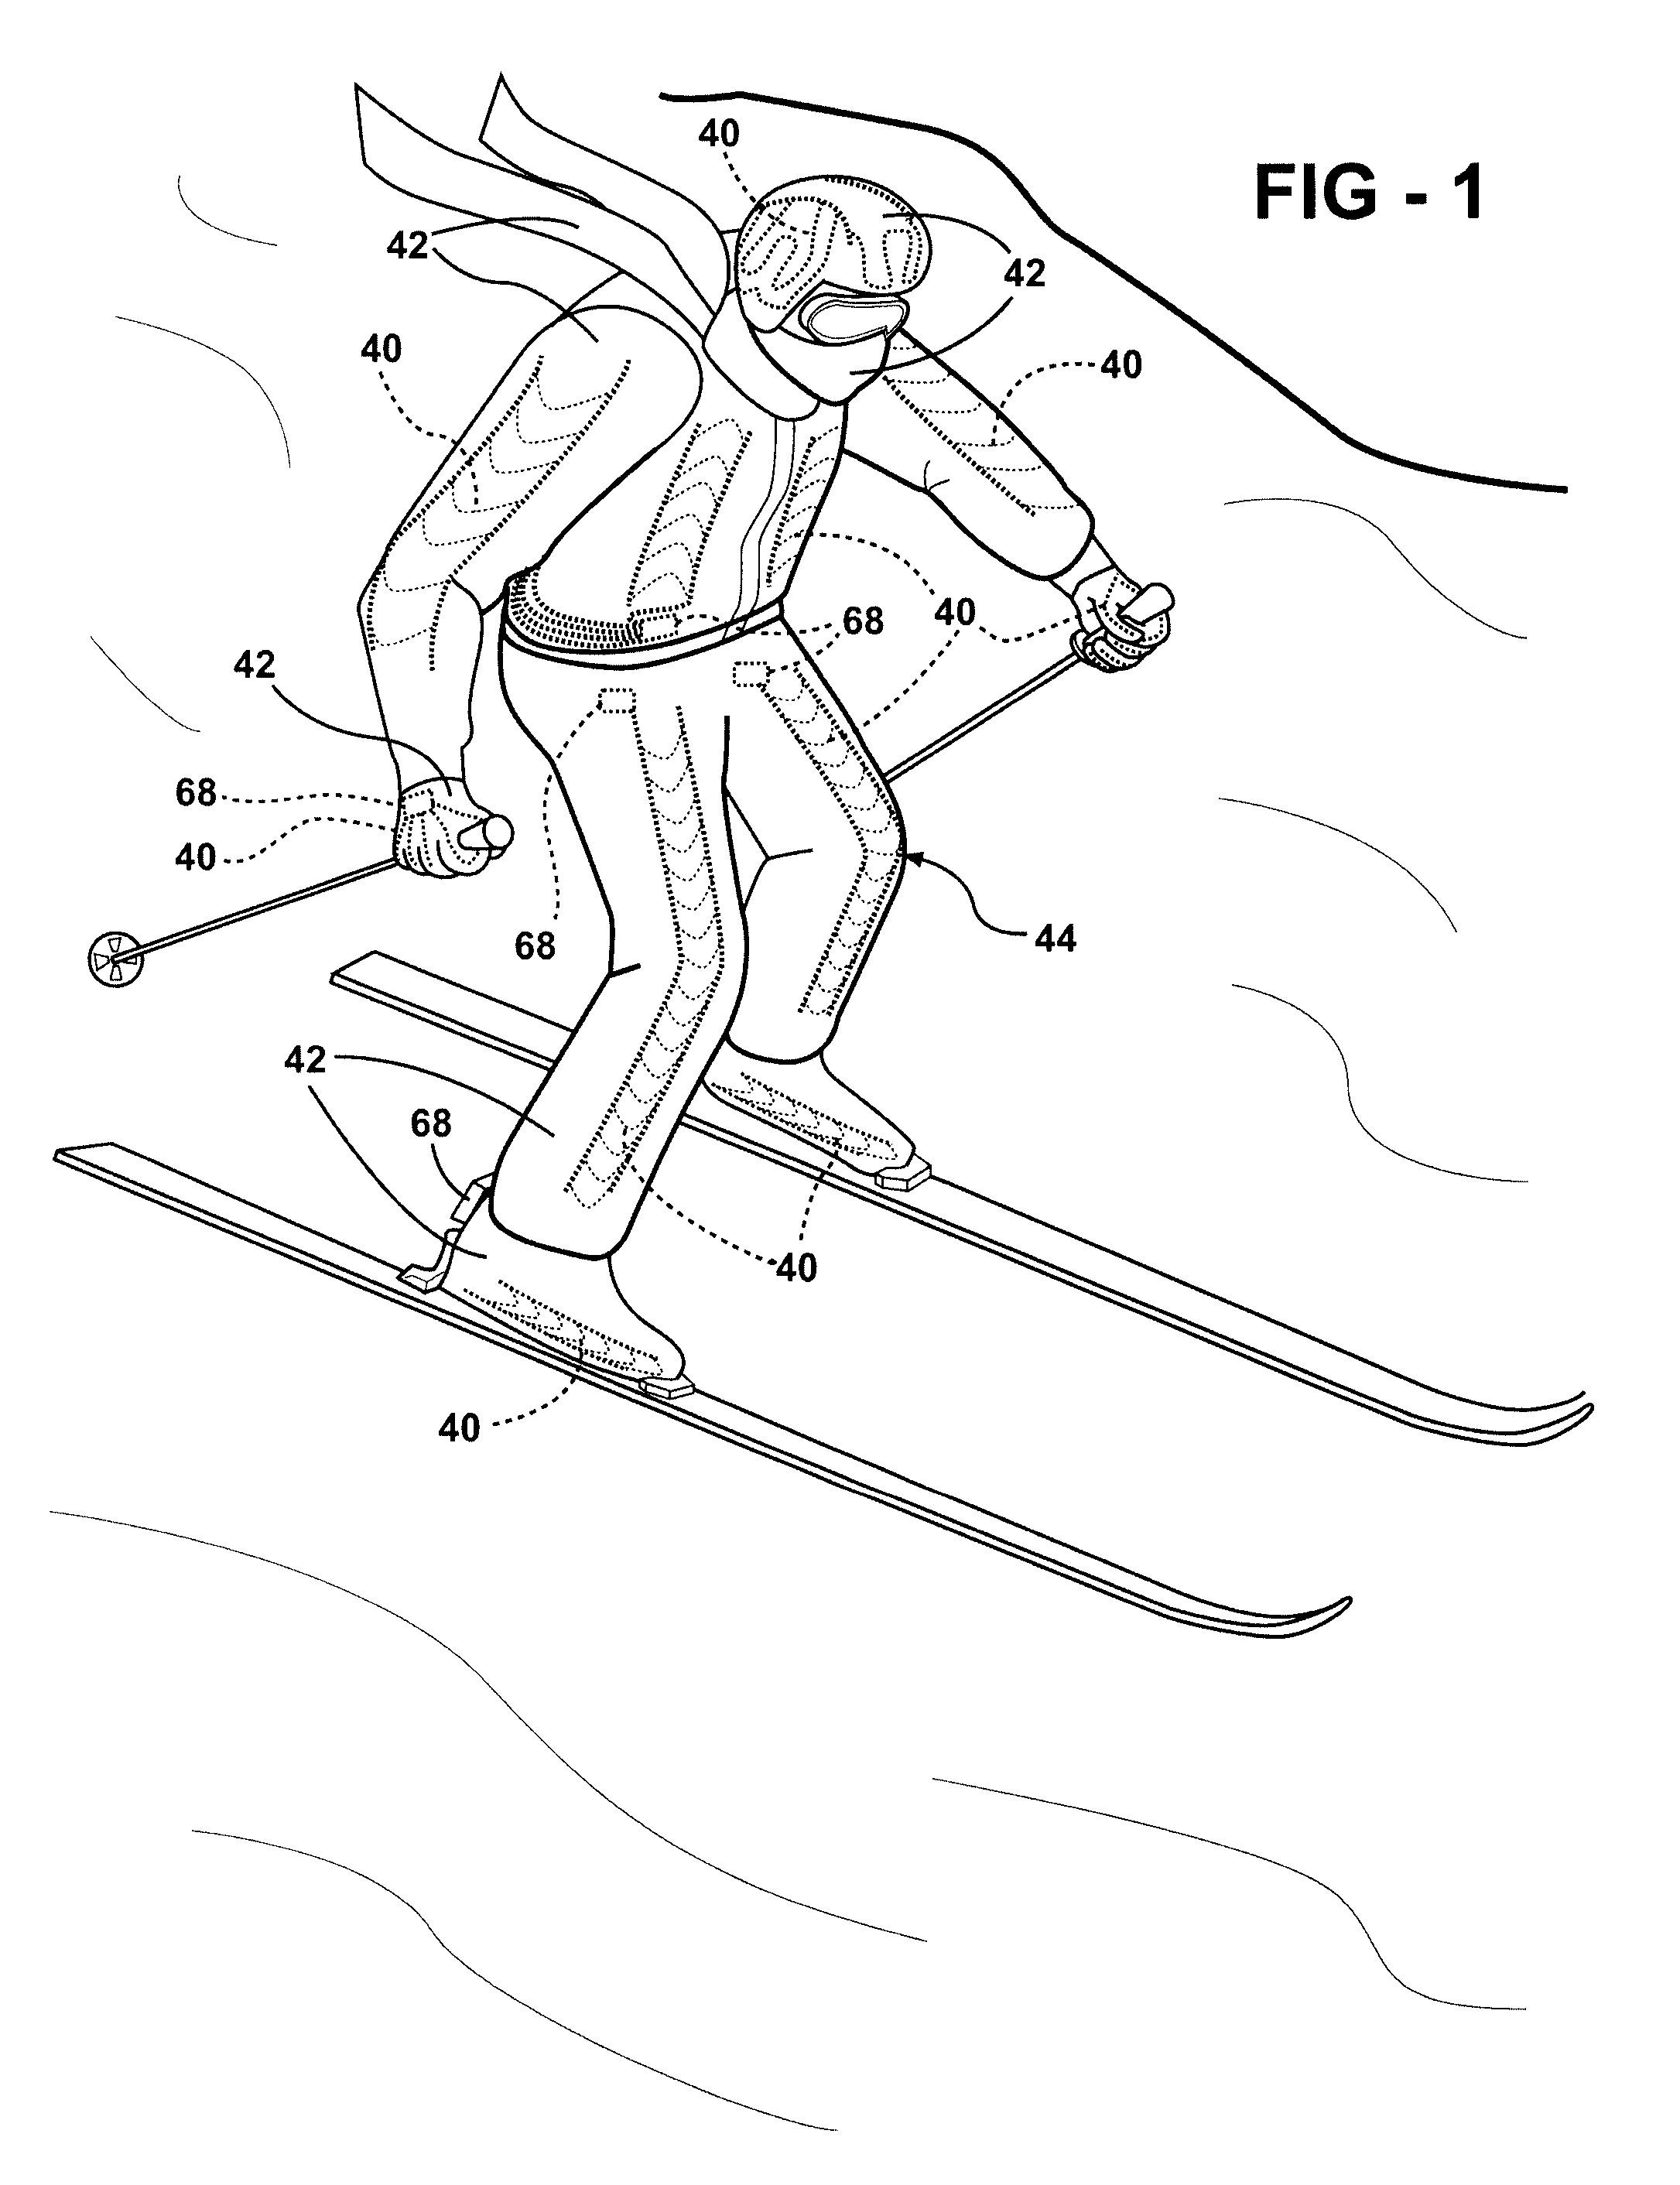 Heated textiles and methods of making the same